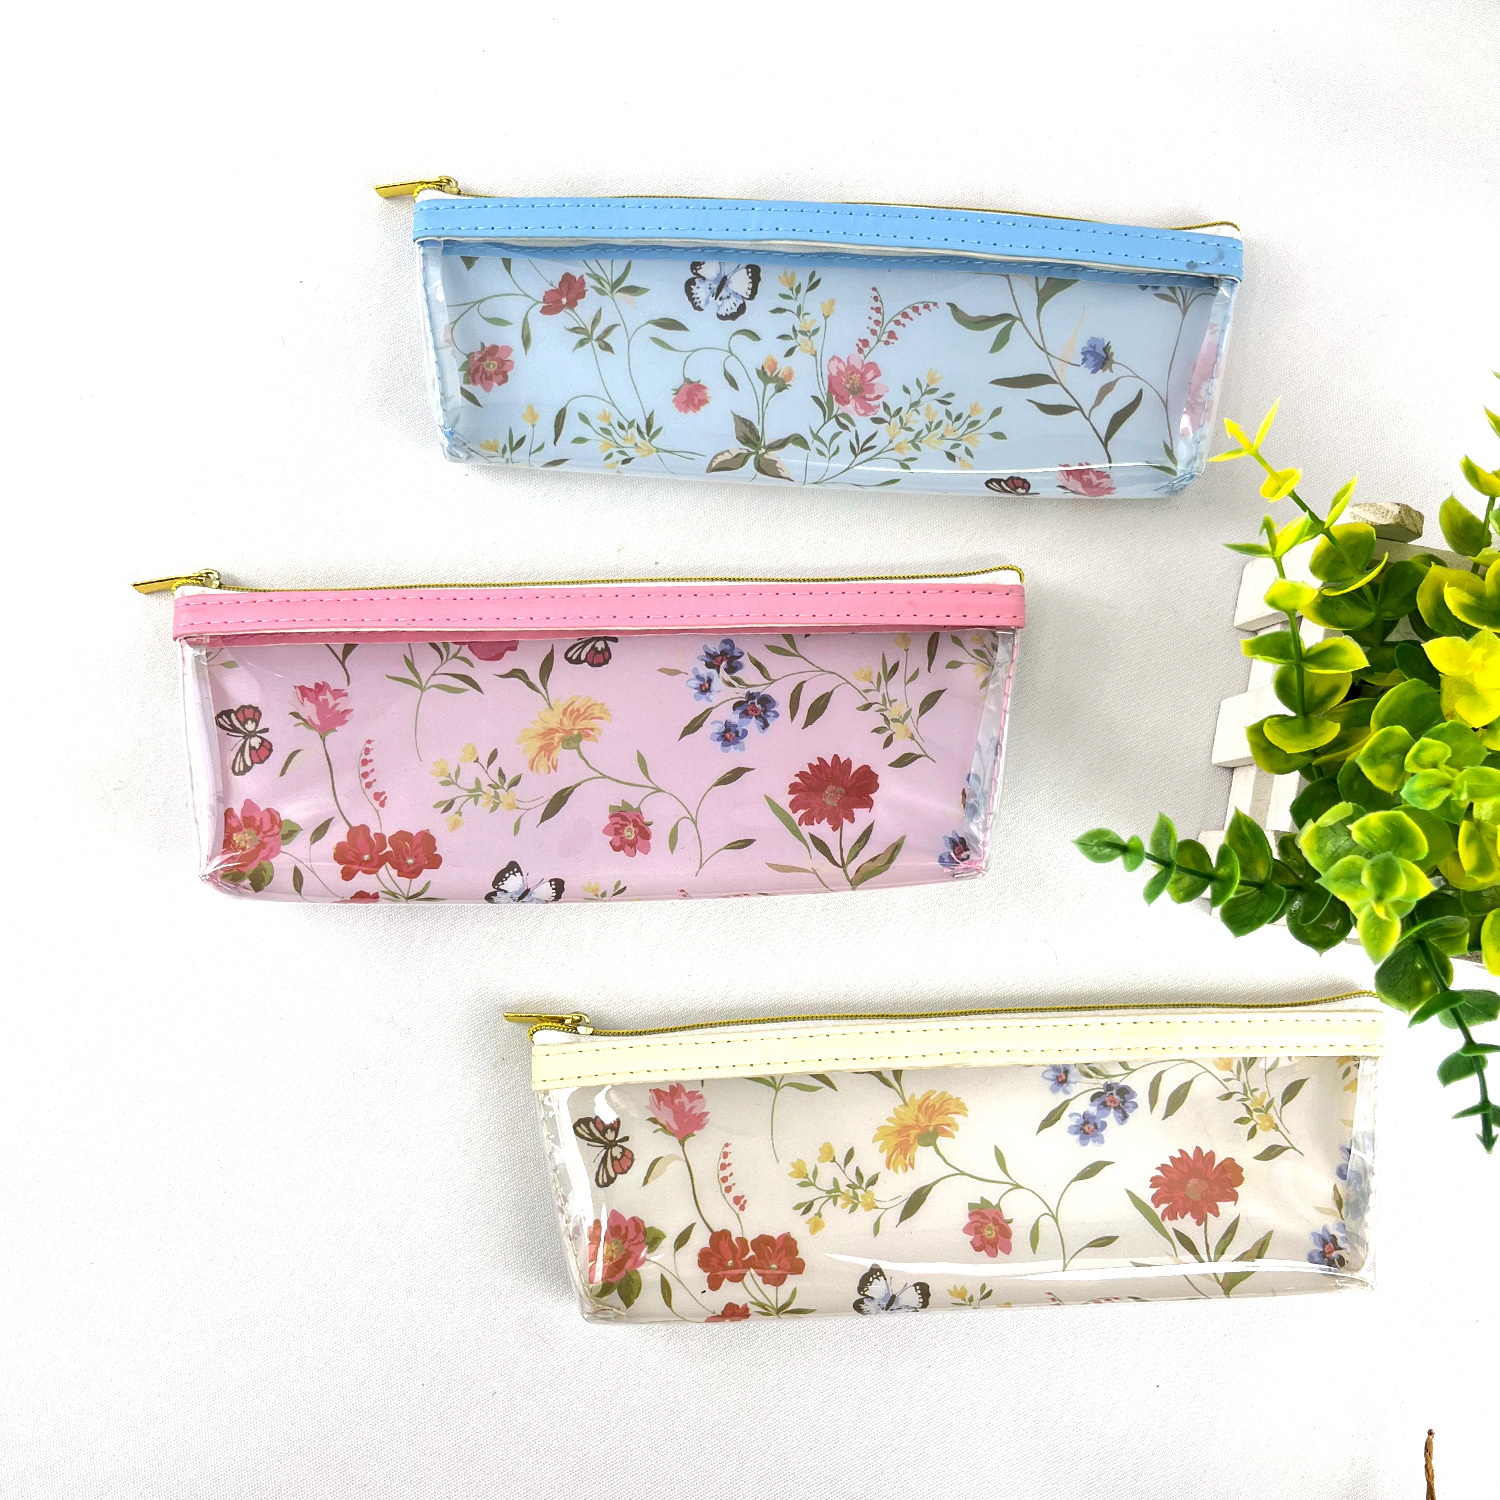 Flowers PVC pencil pouch organizer case handbag with zipper closure all-in-one a range of color available cosmetic bag for all ages for business office school daily use for kids teenages girls China OEM factory